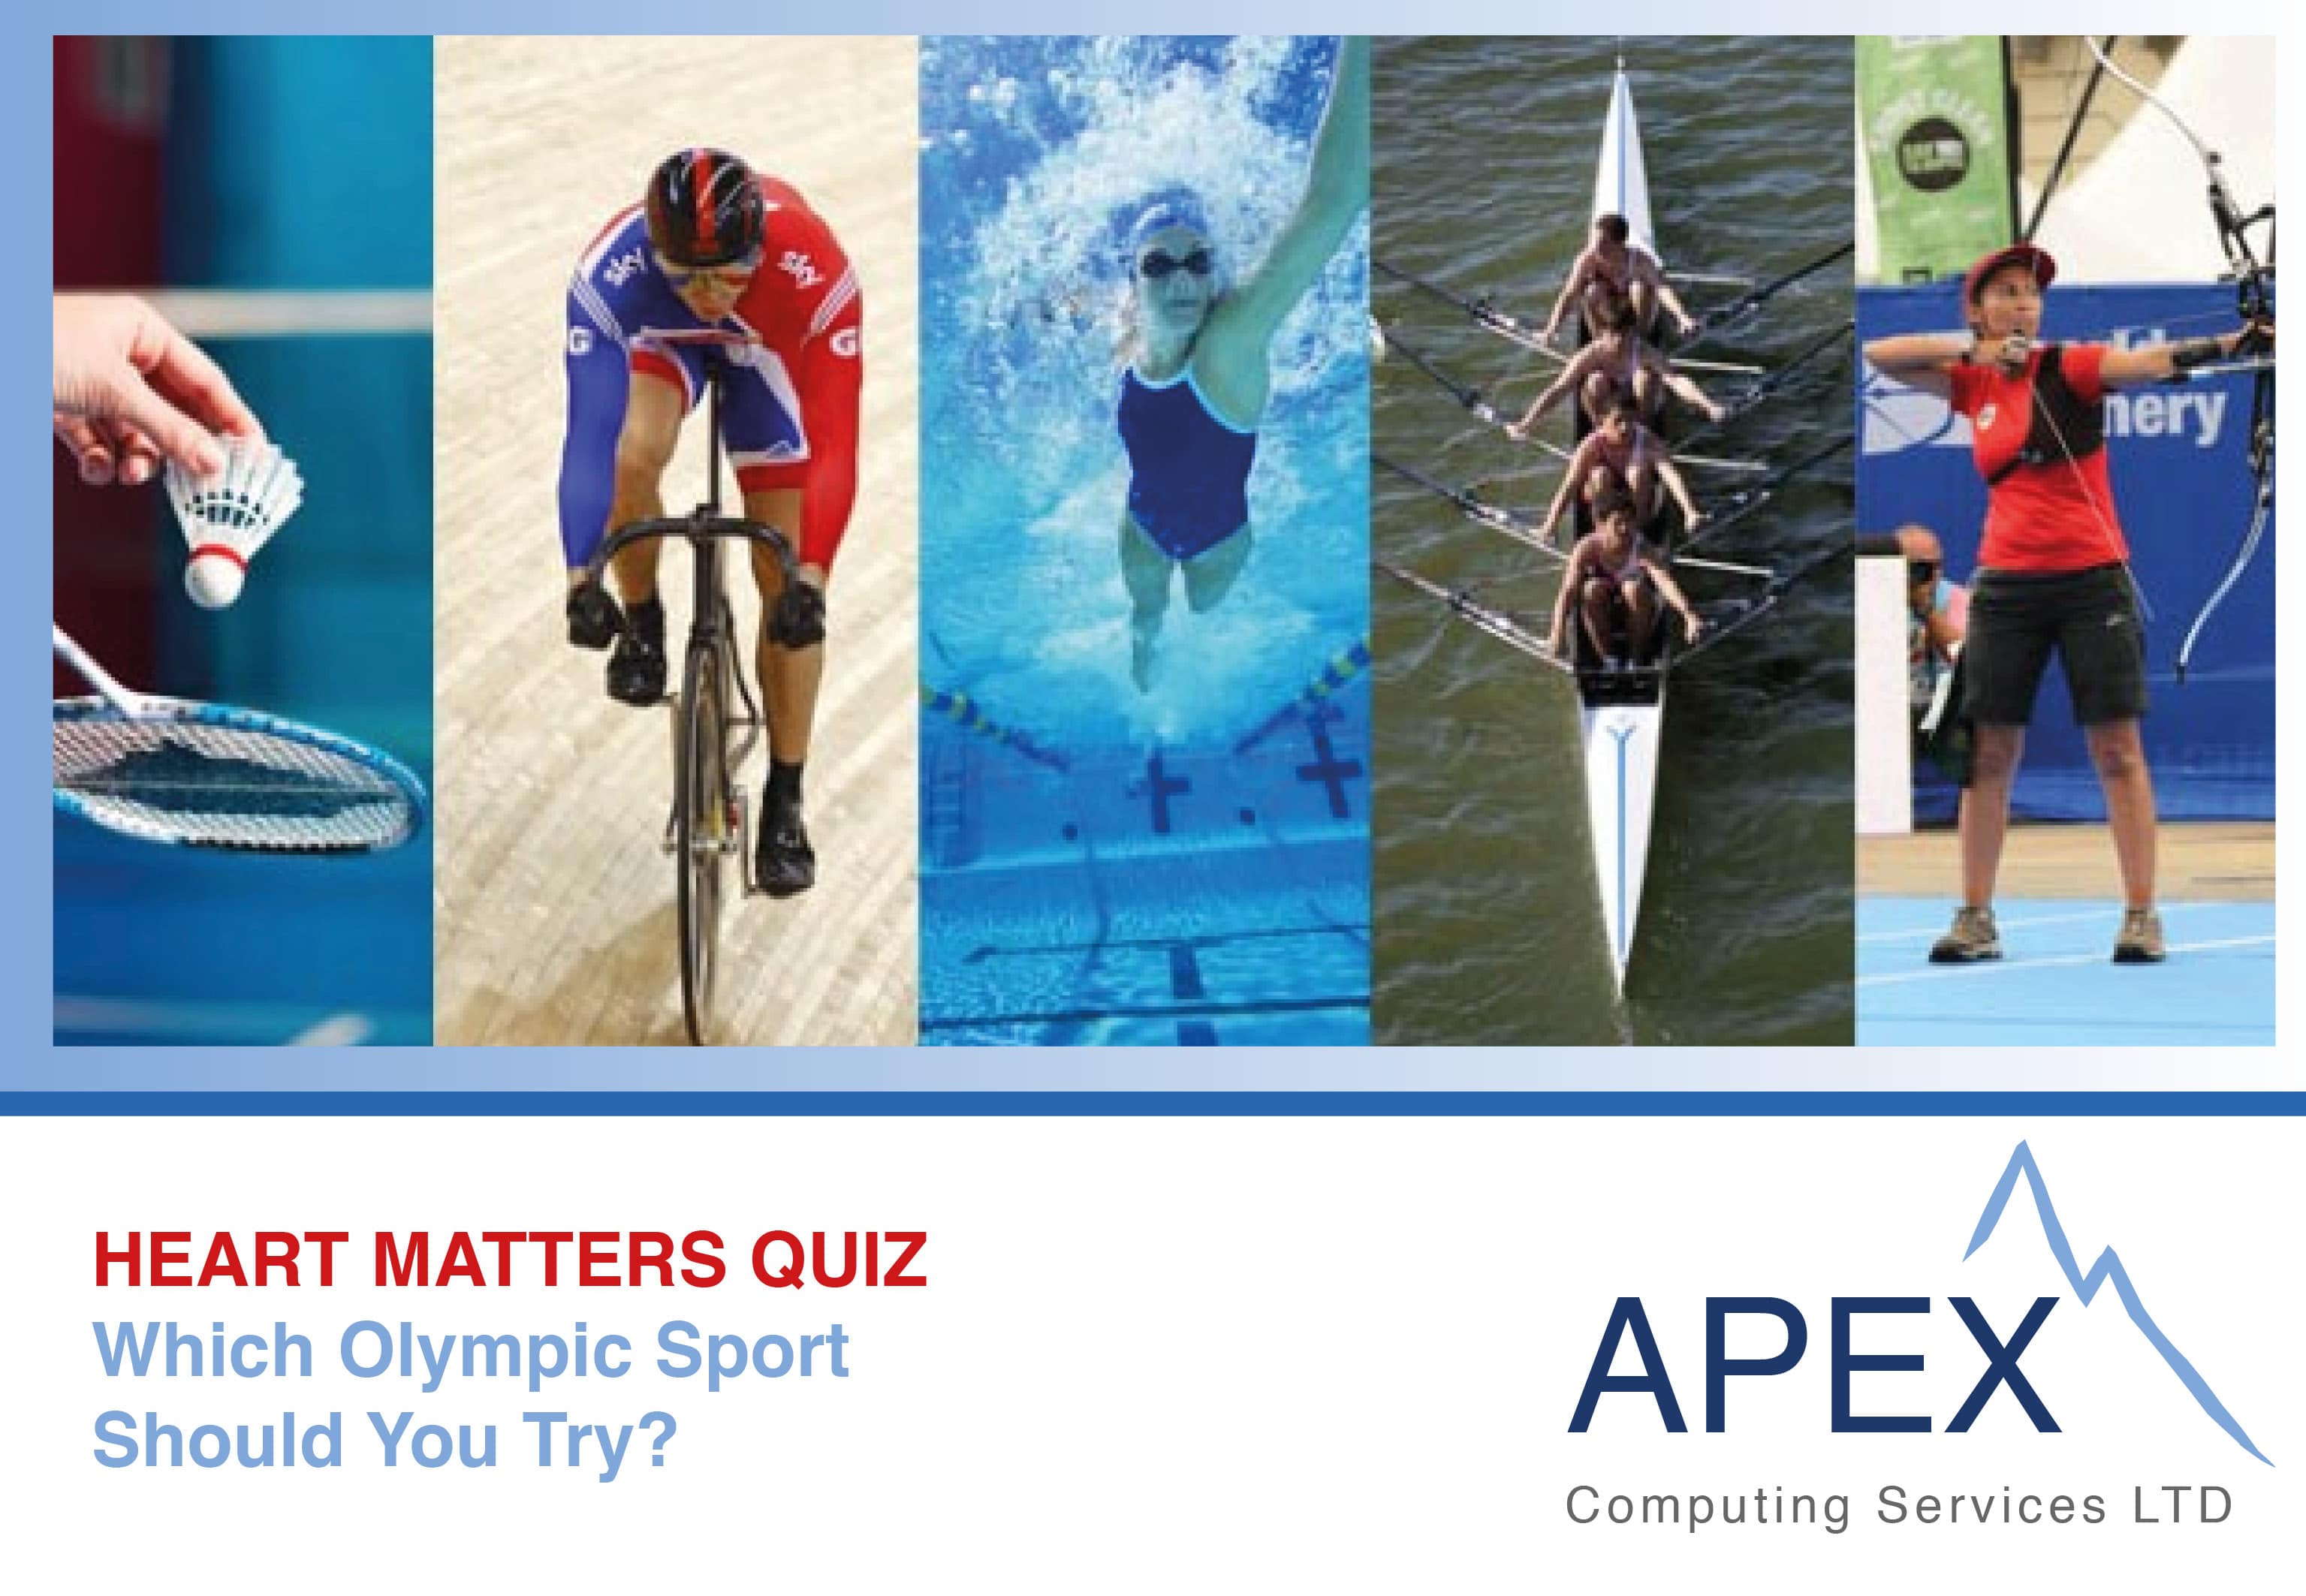 Heart Matters Quiz: Which Olympic Sport Should You Try?